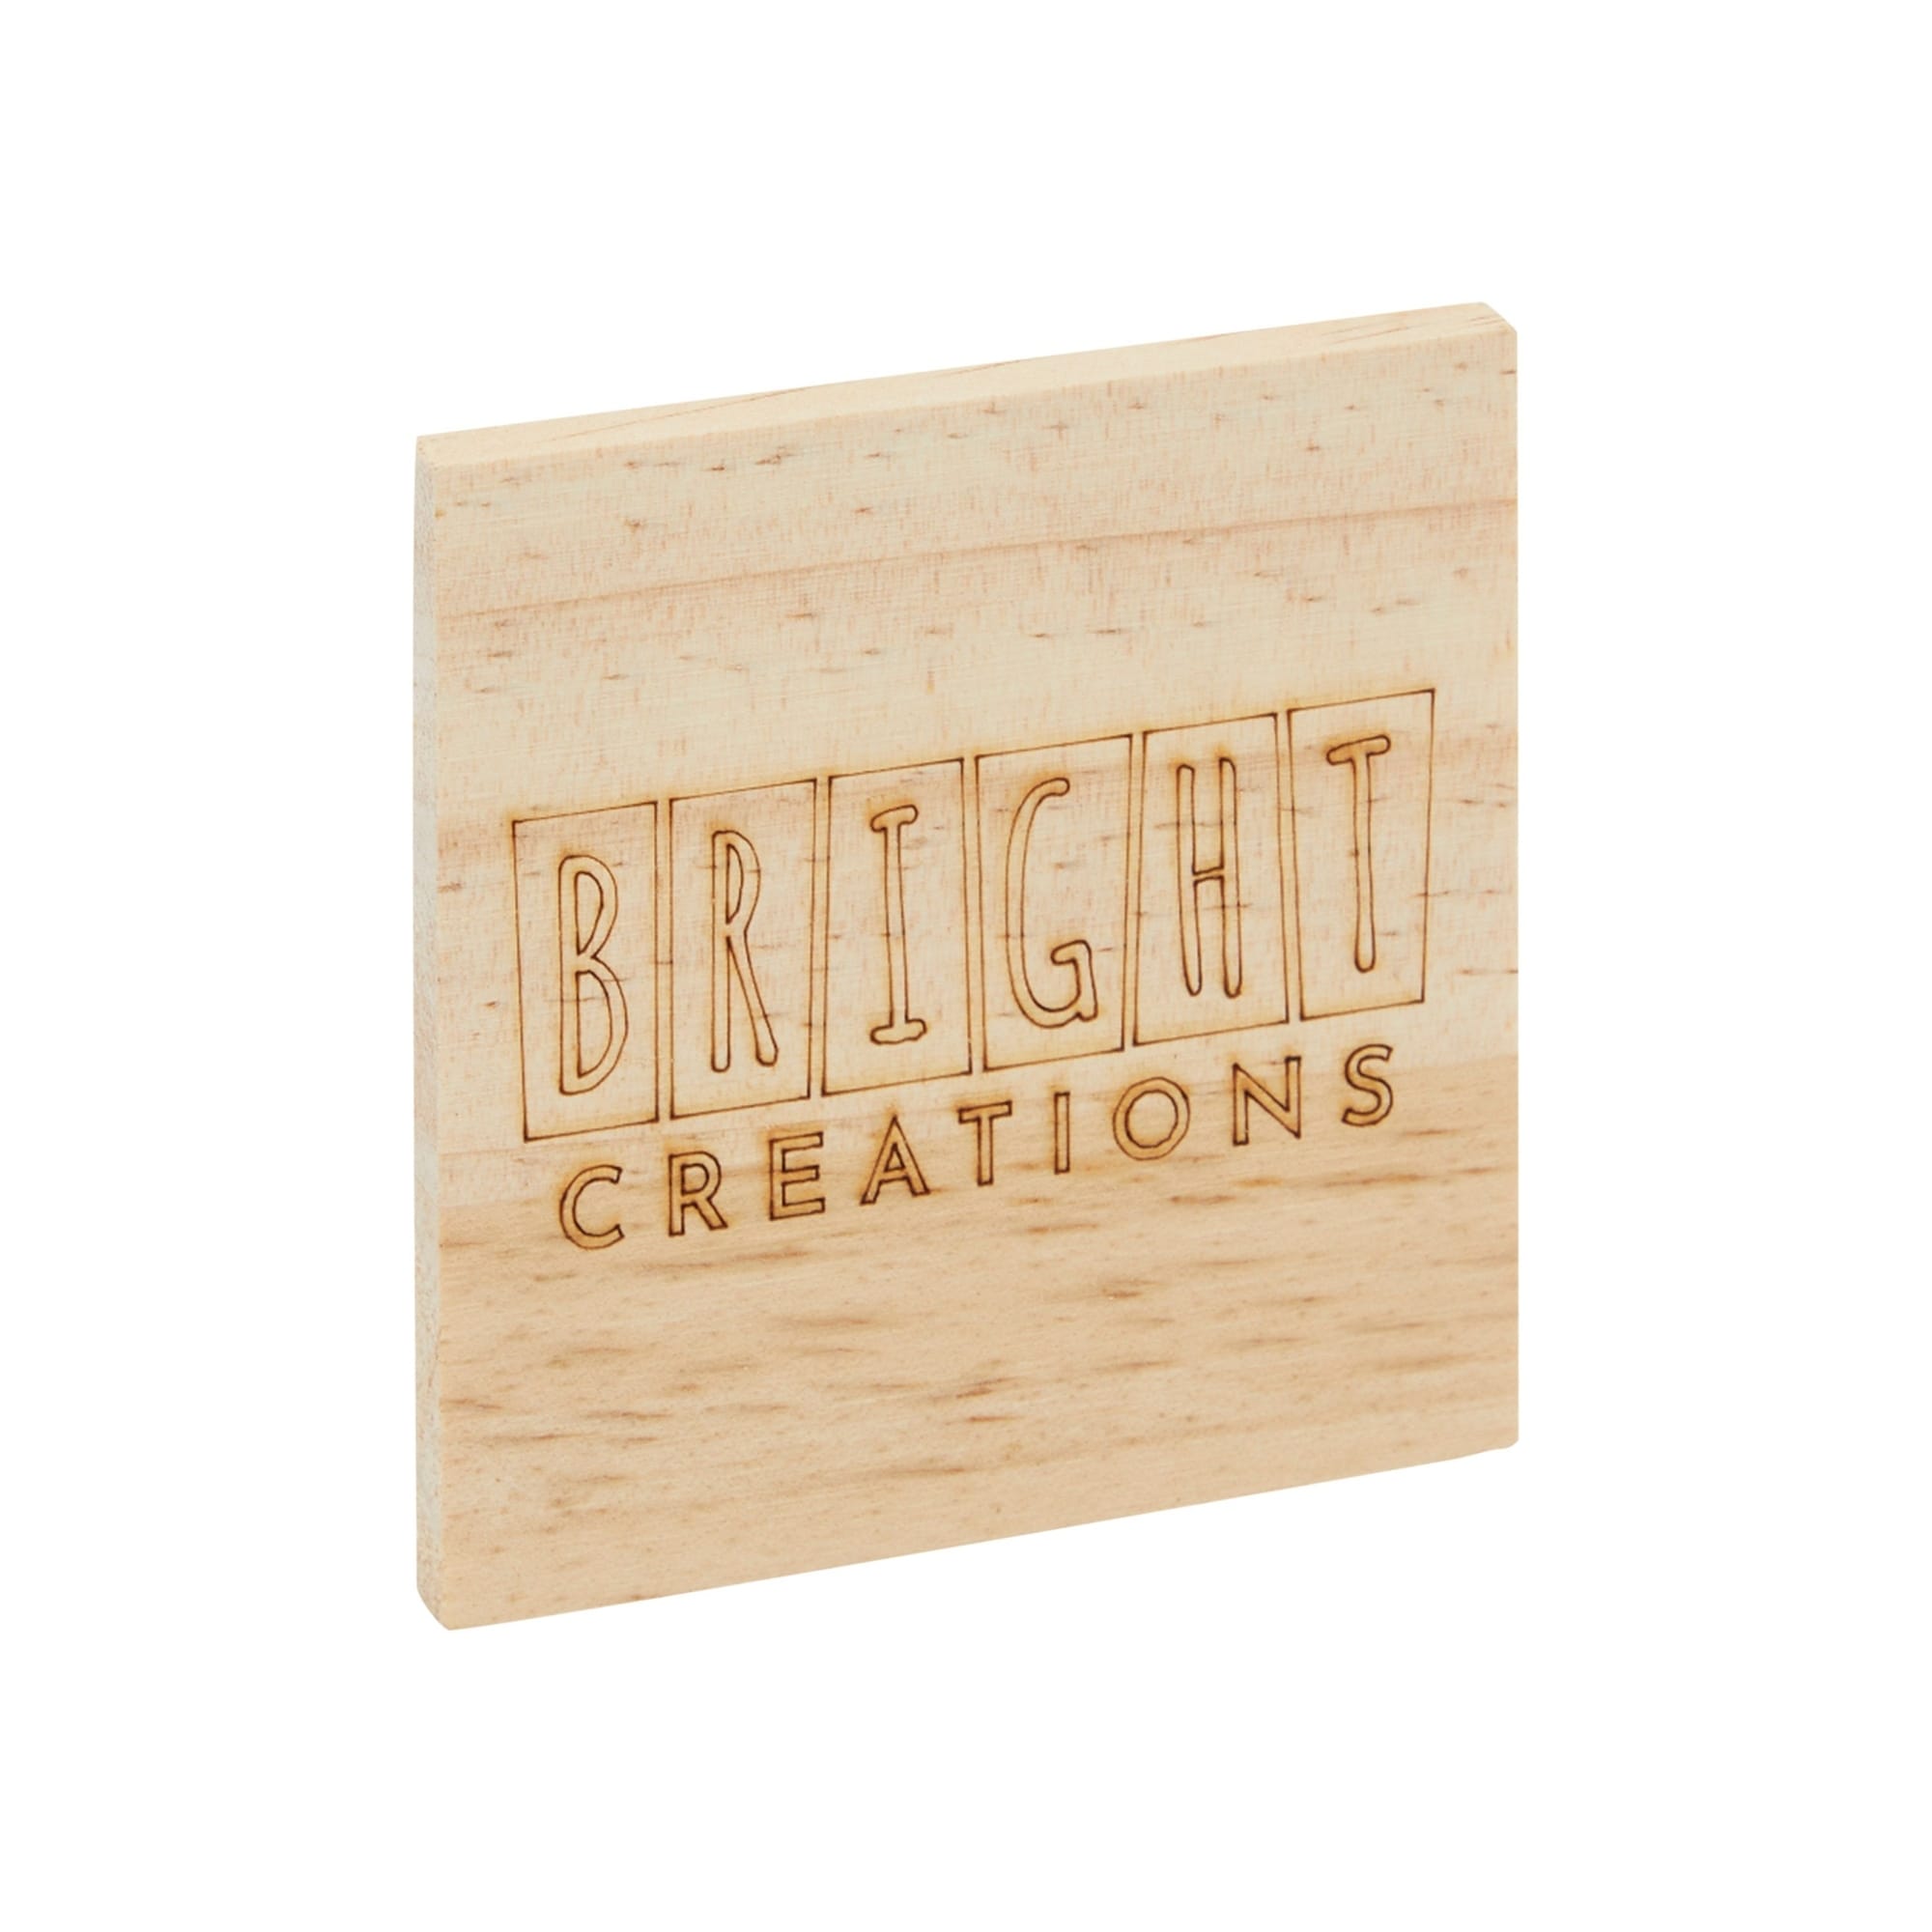 Bright Creations 15 Pack Unfinished Wood Squares Cutout Tiles for Crafts, Engraving, Wood Burning, 3x3 in